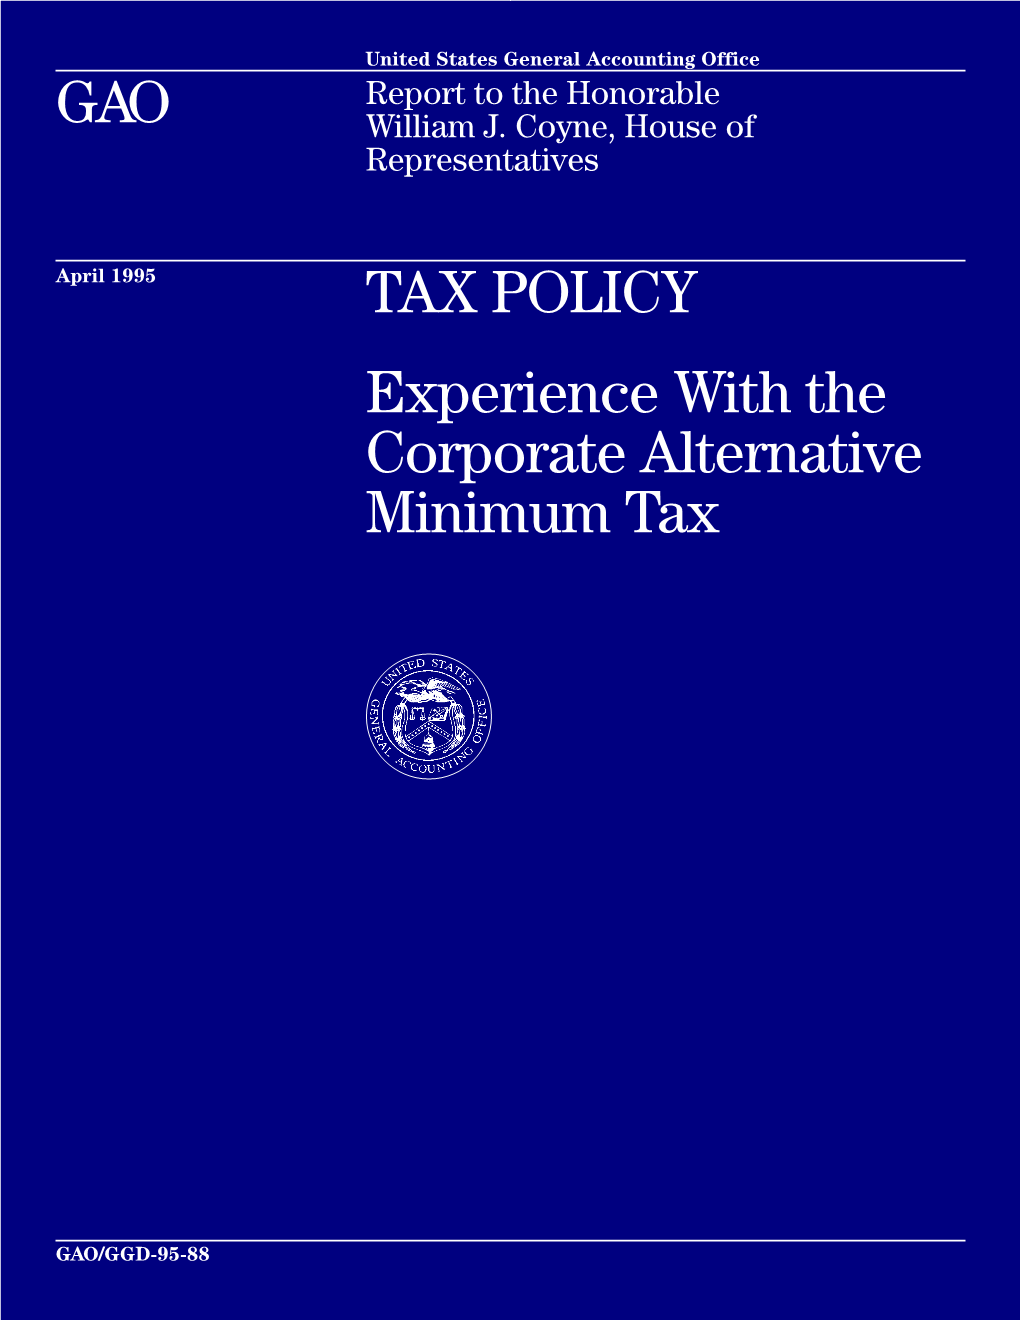 Experience with the Corporate Alternative Minimum Tax